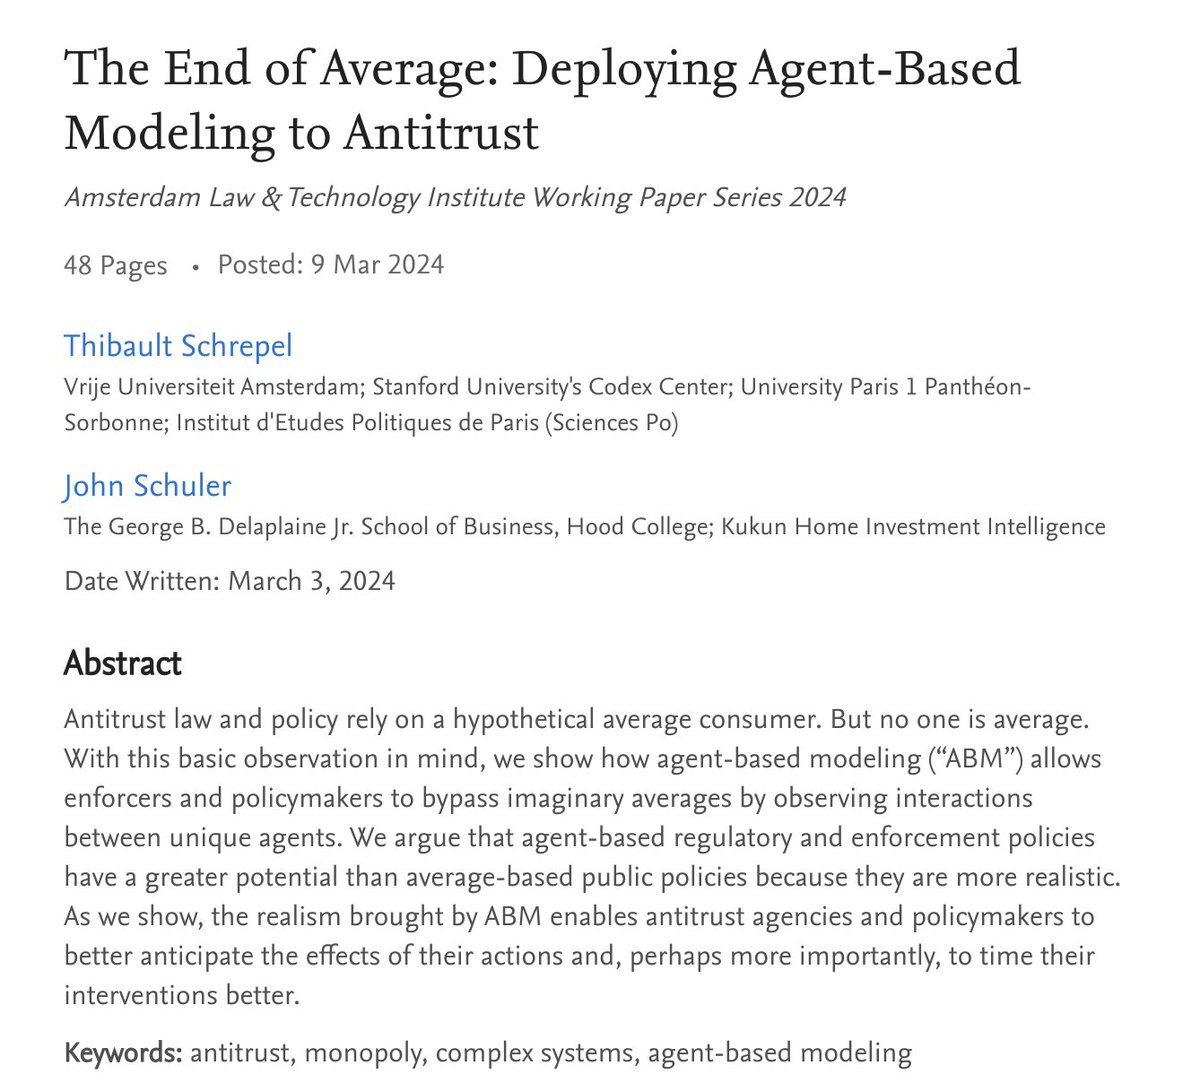 15 months in the making, and here it is: in this working paper, we deploy agent-based modeling to antitrust for the first time: papers.ssrn.com/sol3/papers.cf… Specifically, we provide a computer simulation with unique agents (i.e., agents with different speed/privacy preferences)…